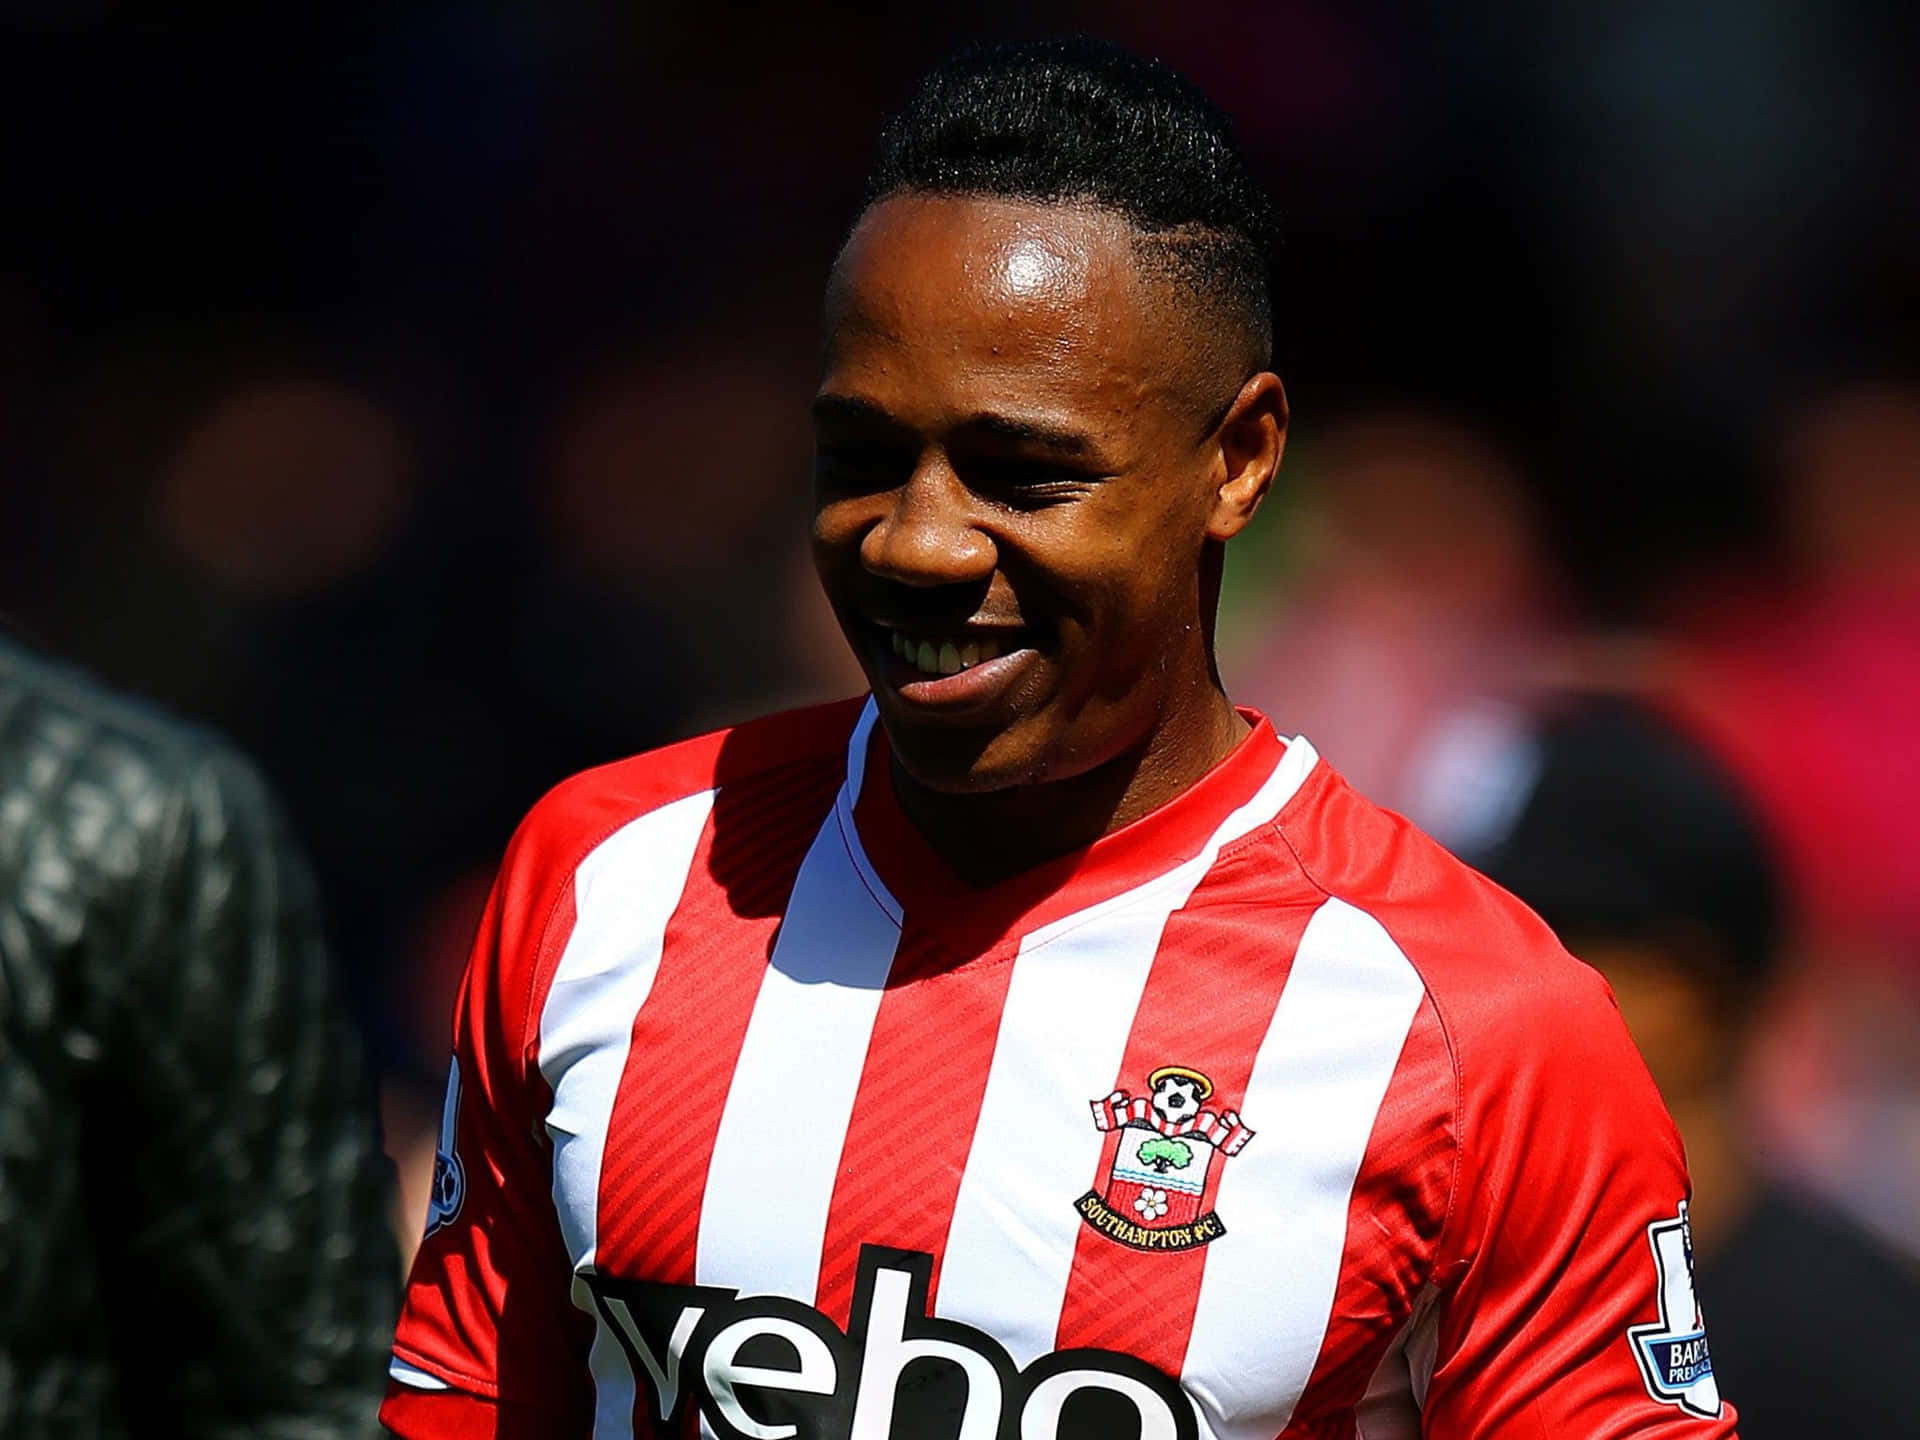 Nathaniel Clyne Smiling Brightly on the Field Wallpaper